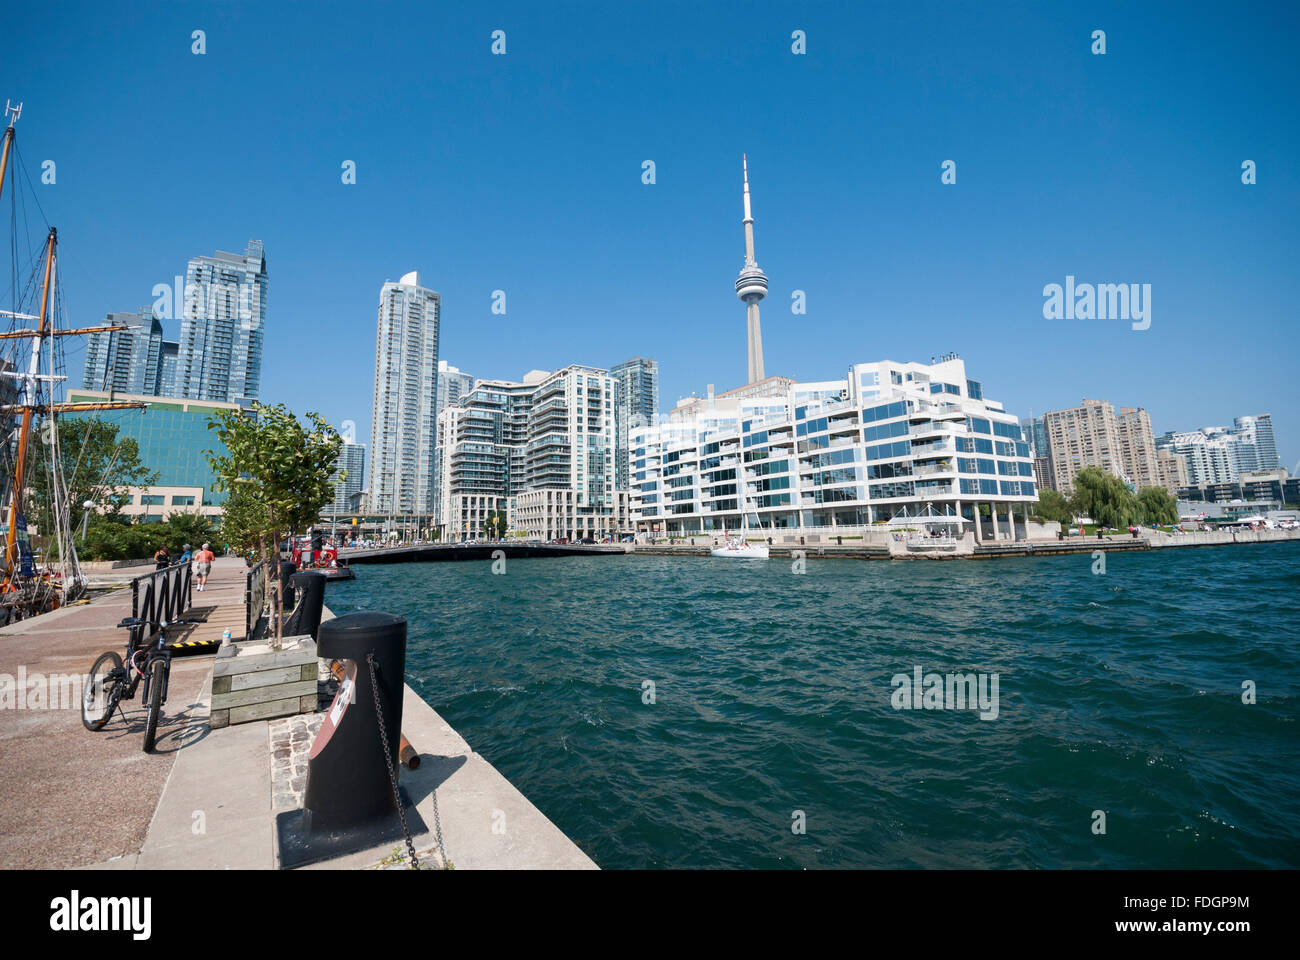 A scenic pedestrian boulevard at Toronto's Harbourfront. Stock Photo